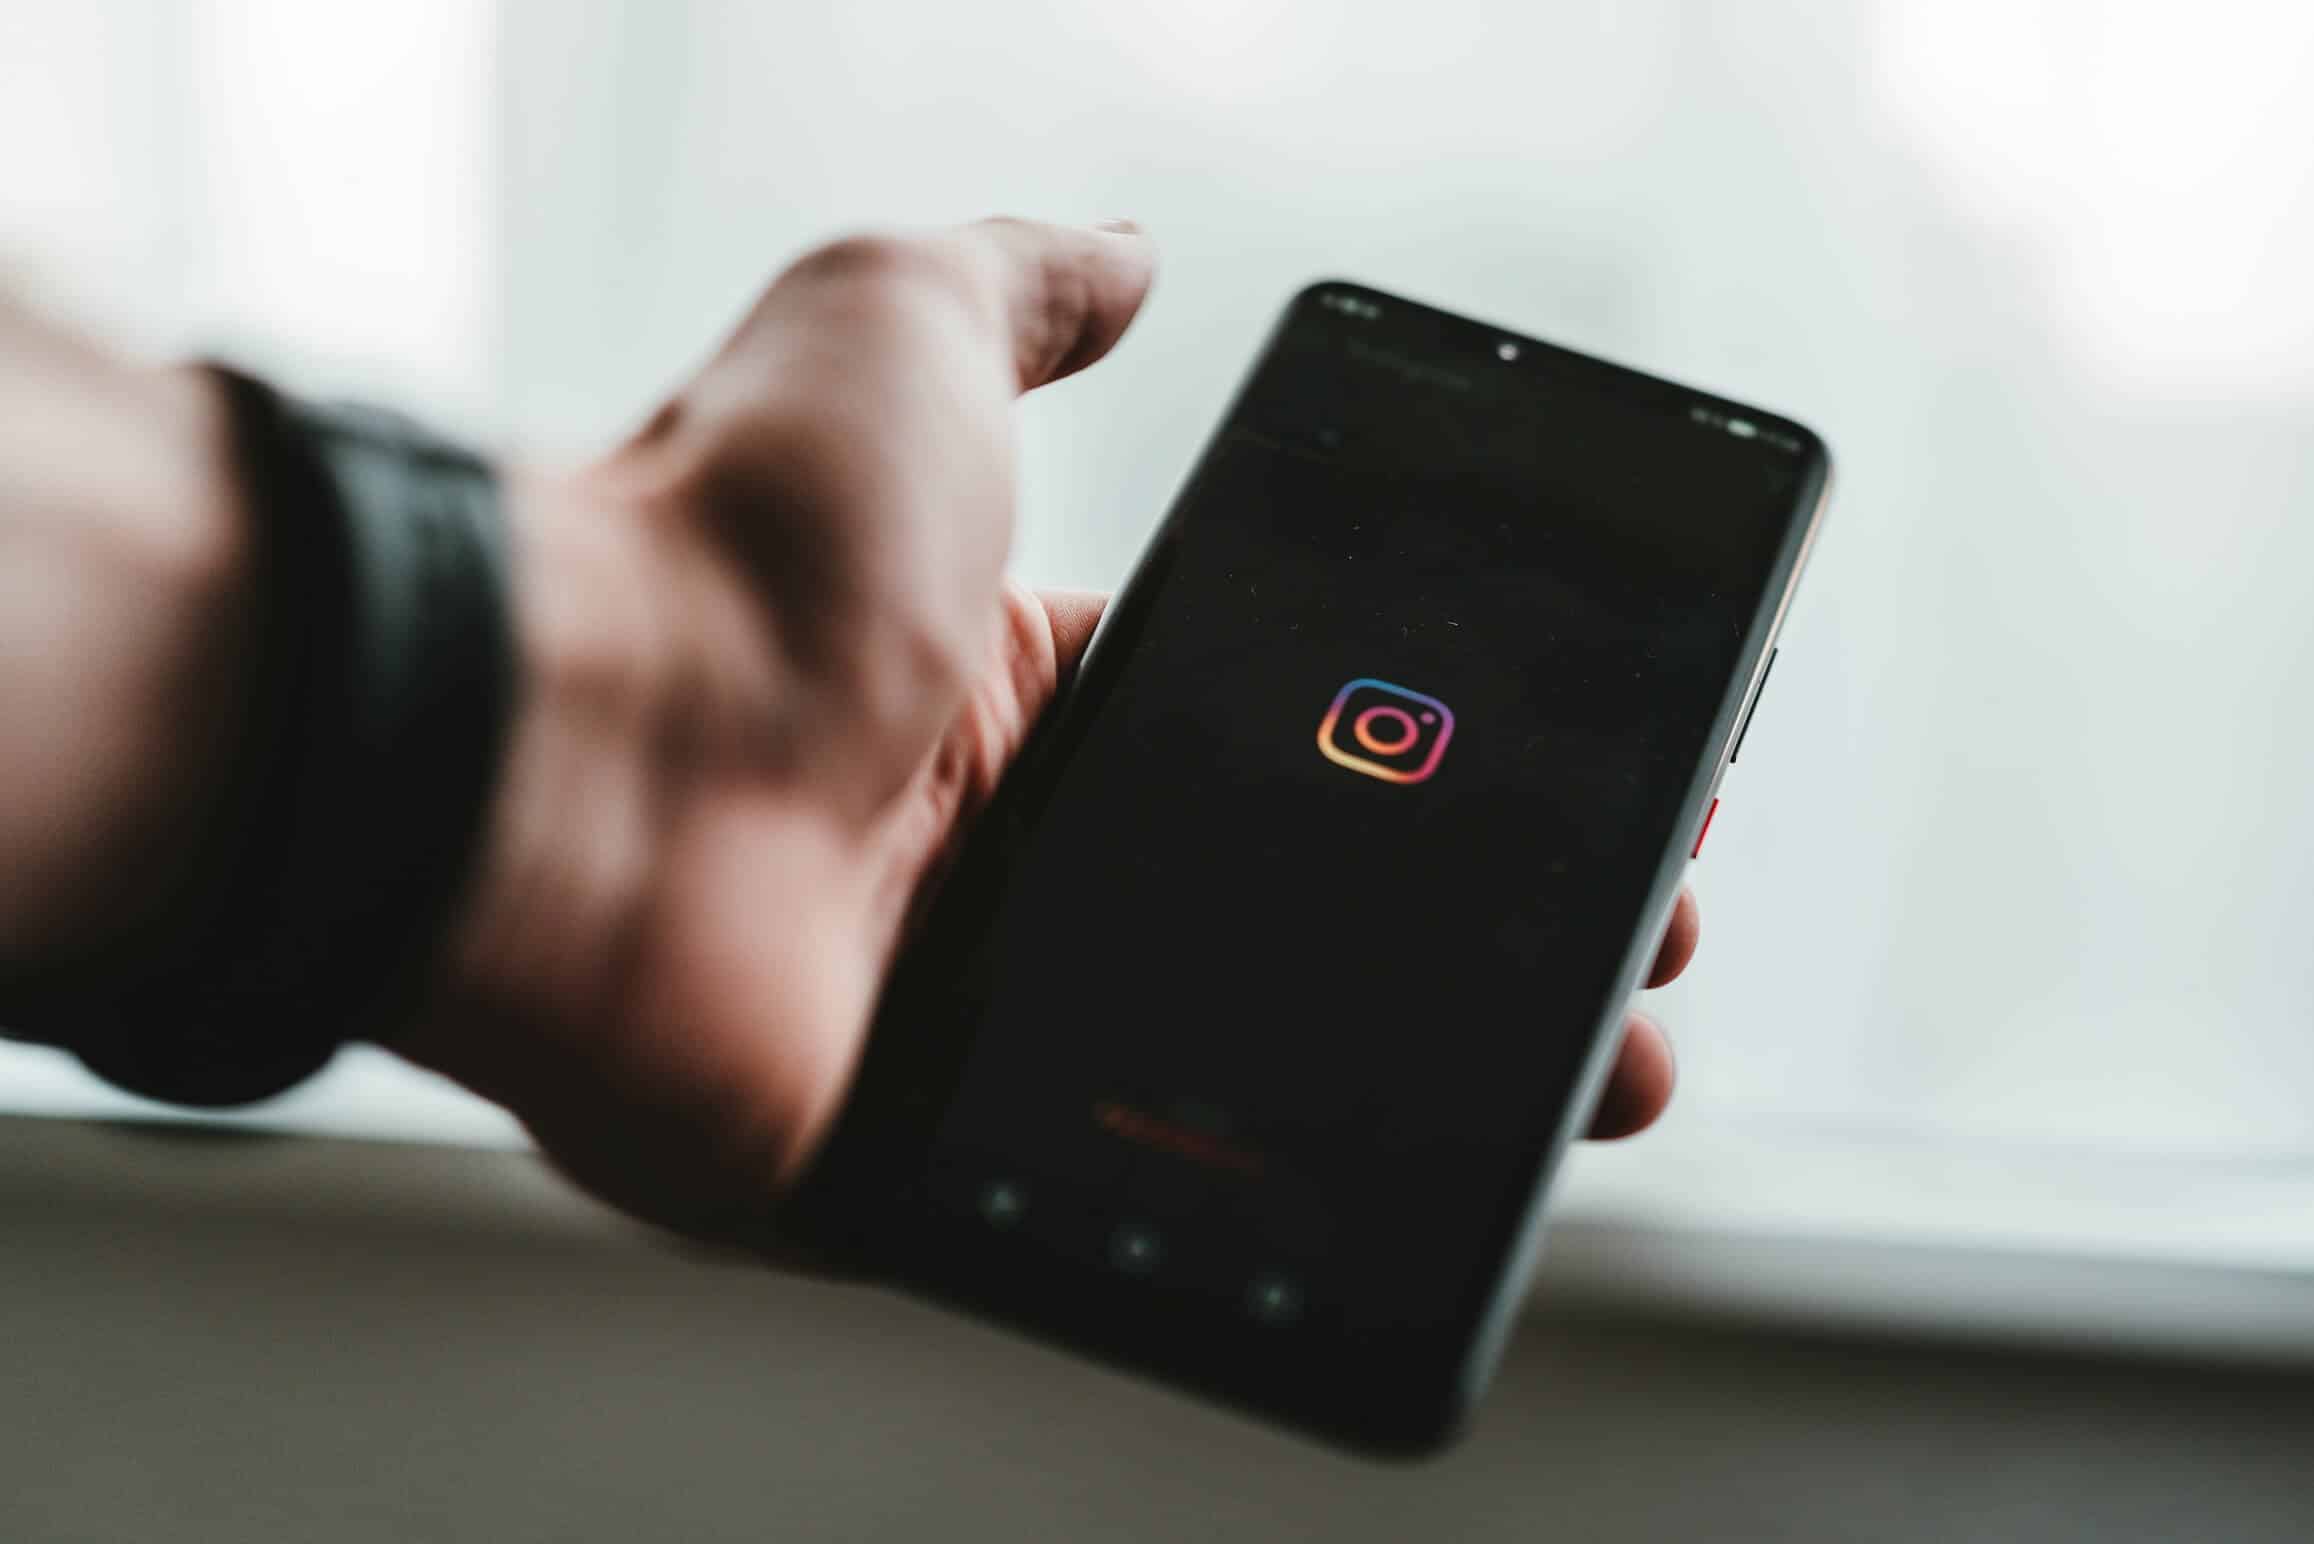 How to build a musician’s IG brand: Win the marketing game and gain many Instagram followers